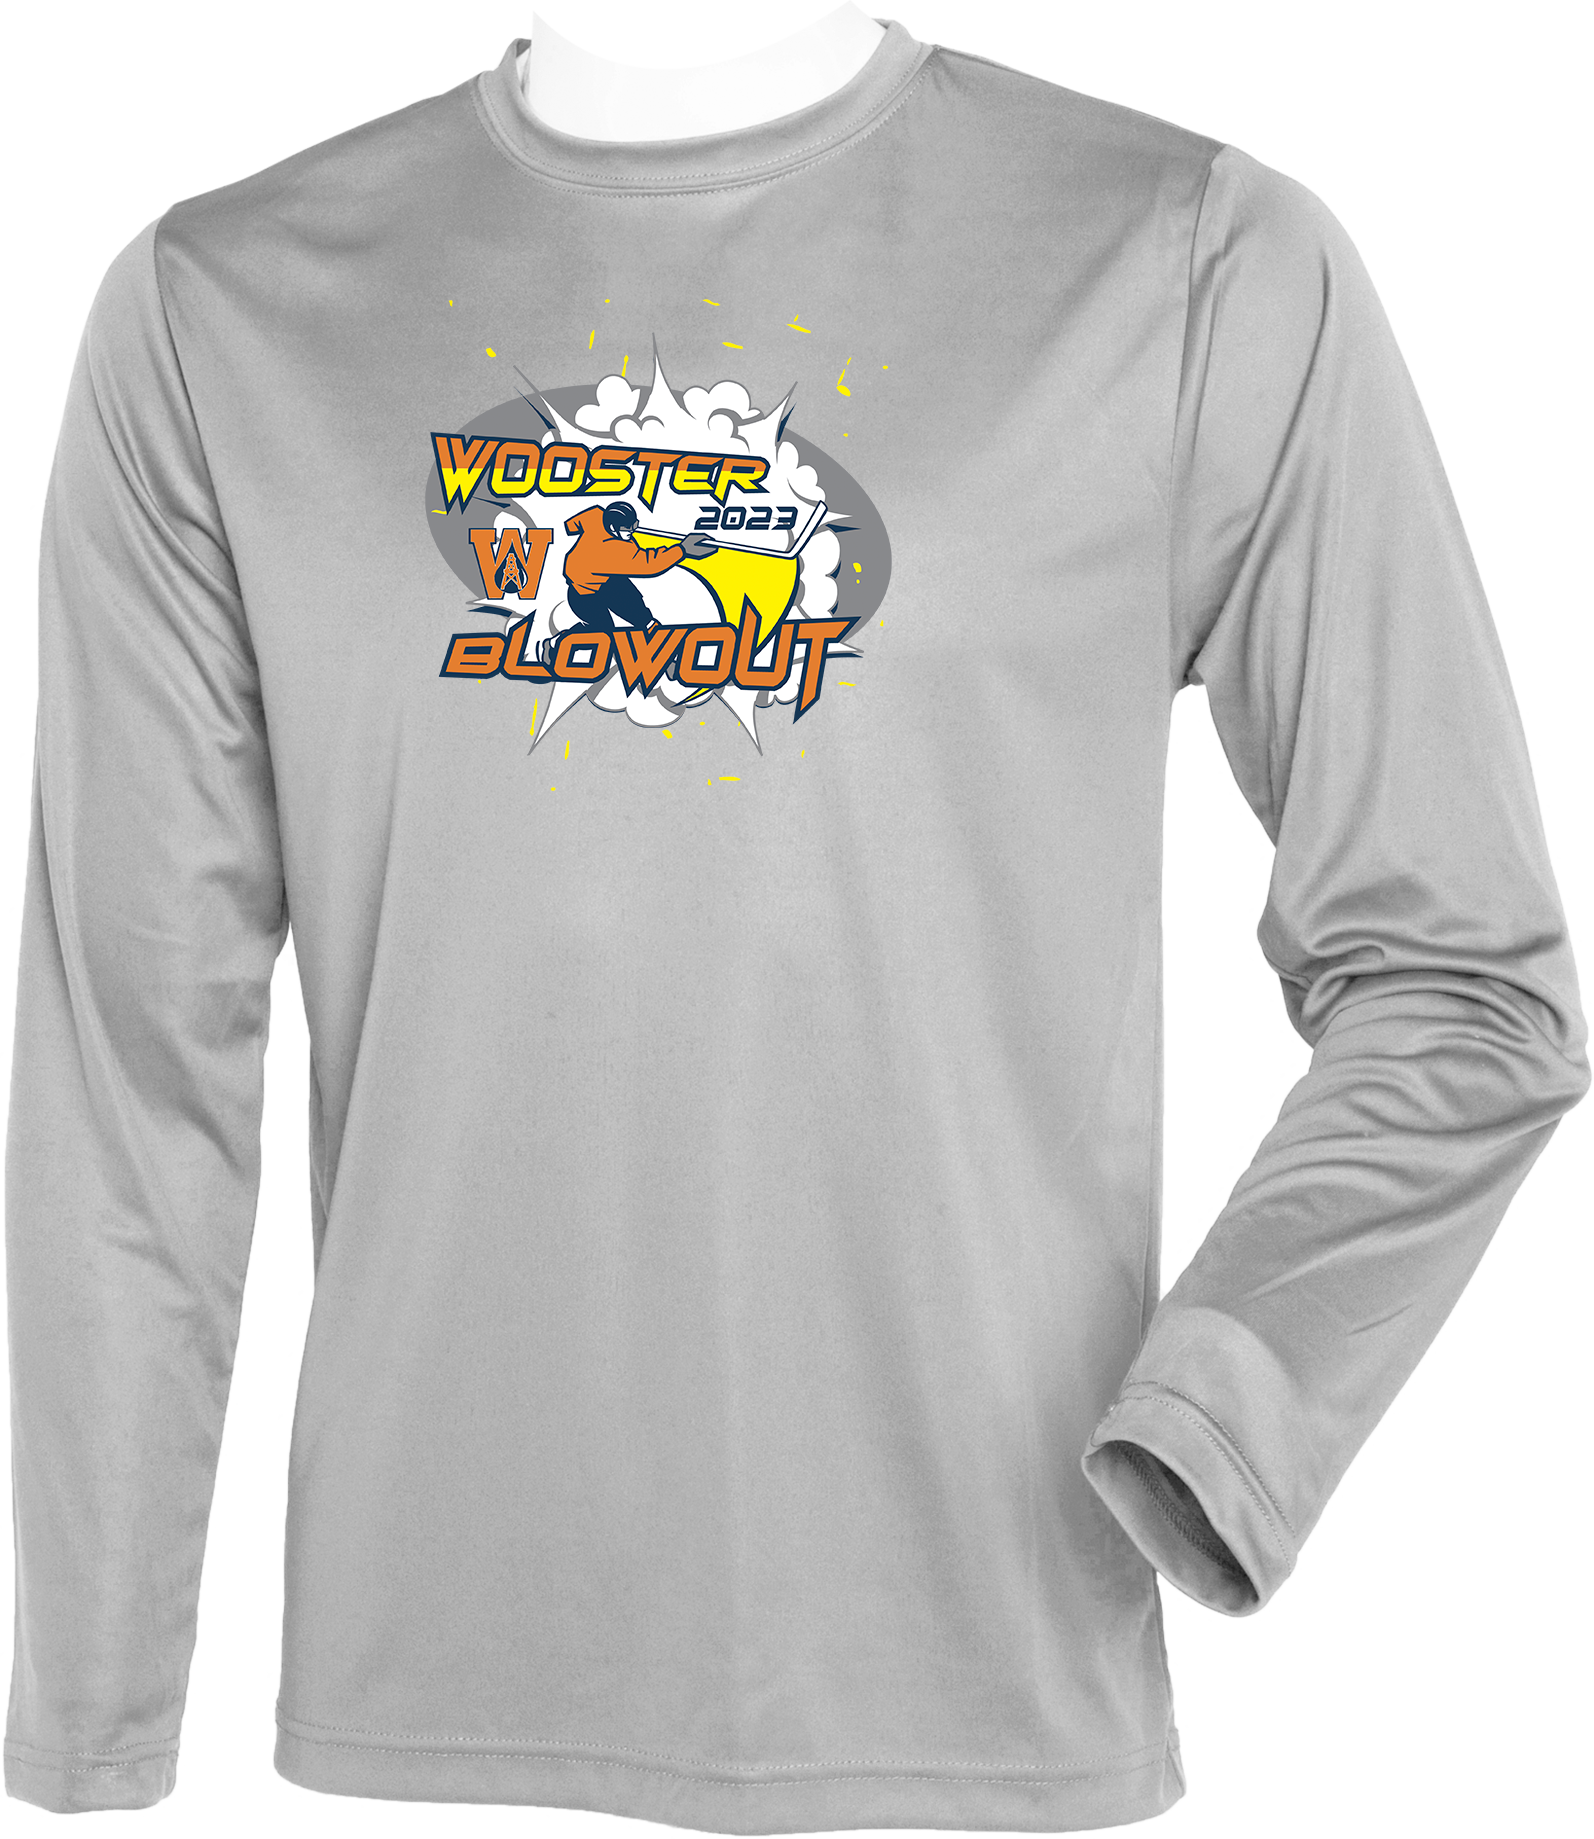 PERFORMANCE SHIRTS - 2023 Wooster Blowout